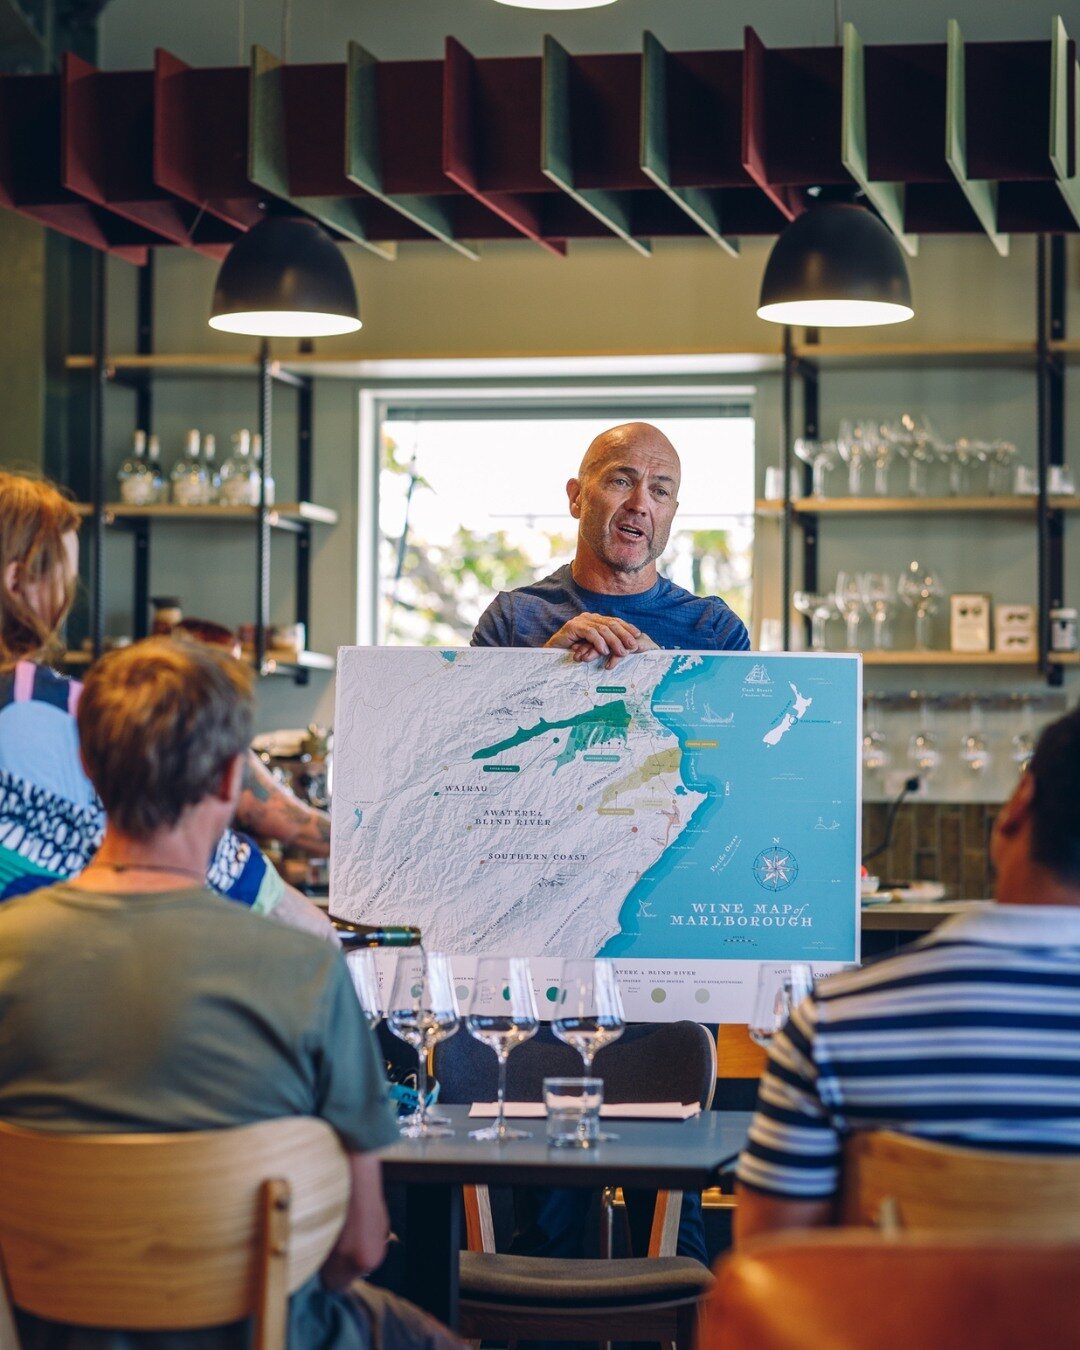 Lower Wairau and Dillons Point served as the perfect backdrop for a sunny second day in Marlborough. After a geography and regeneration tour of the areas, guests sat down for an in-depth tasting of new release Marlborough Sauvignon Blanc. An incredib